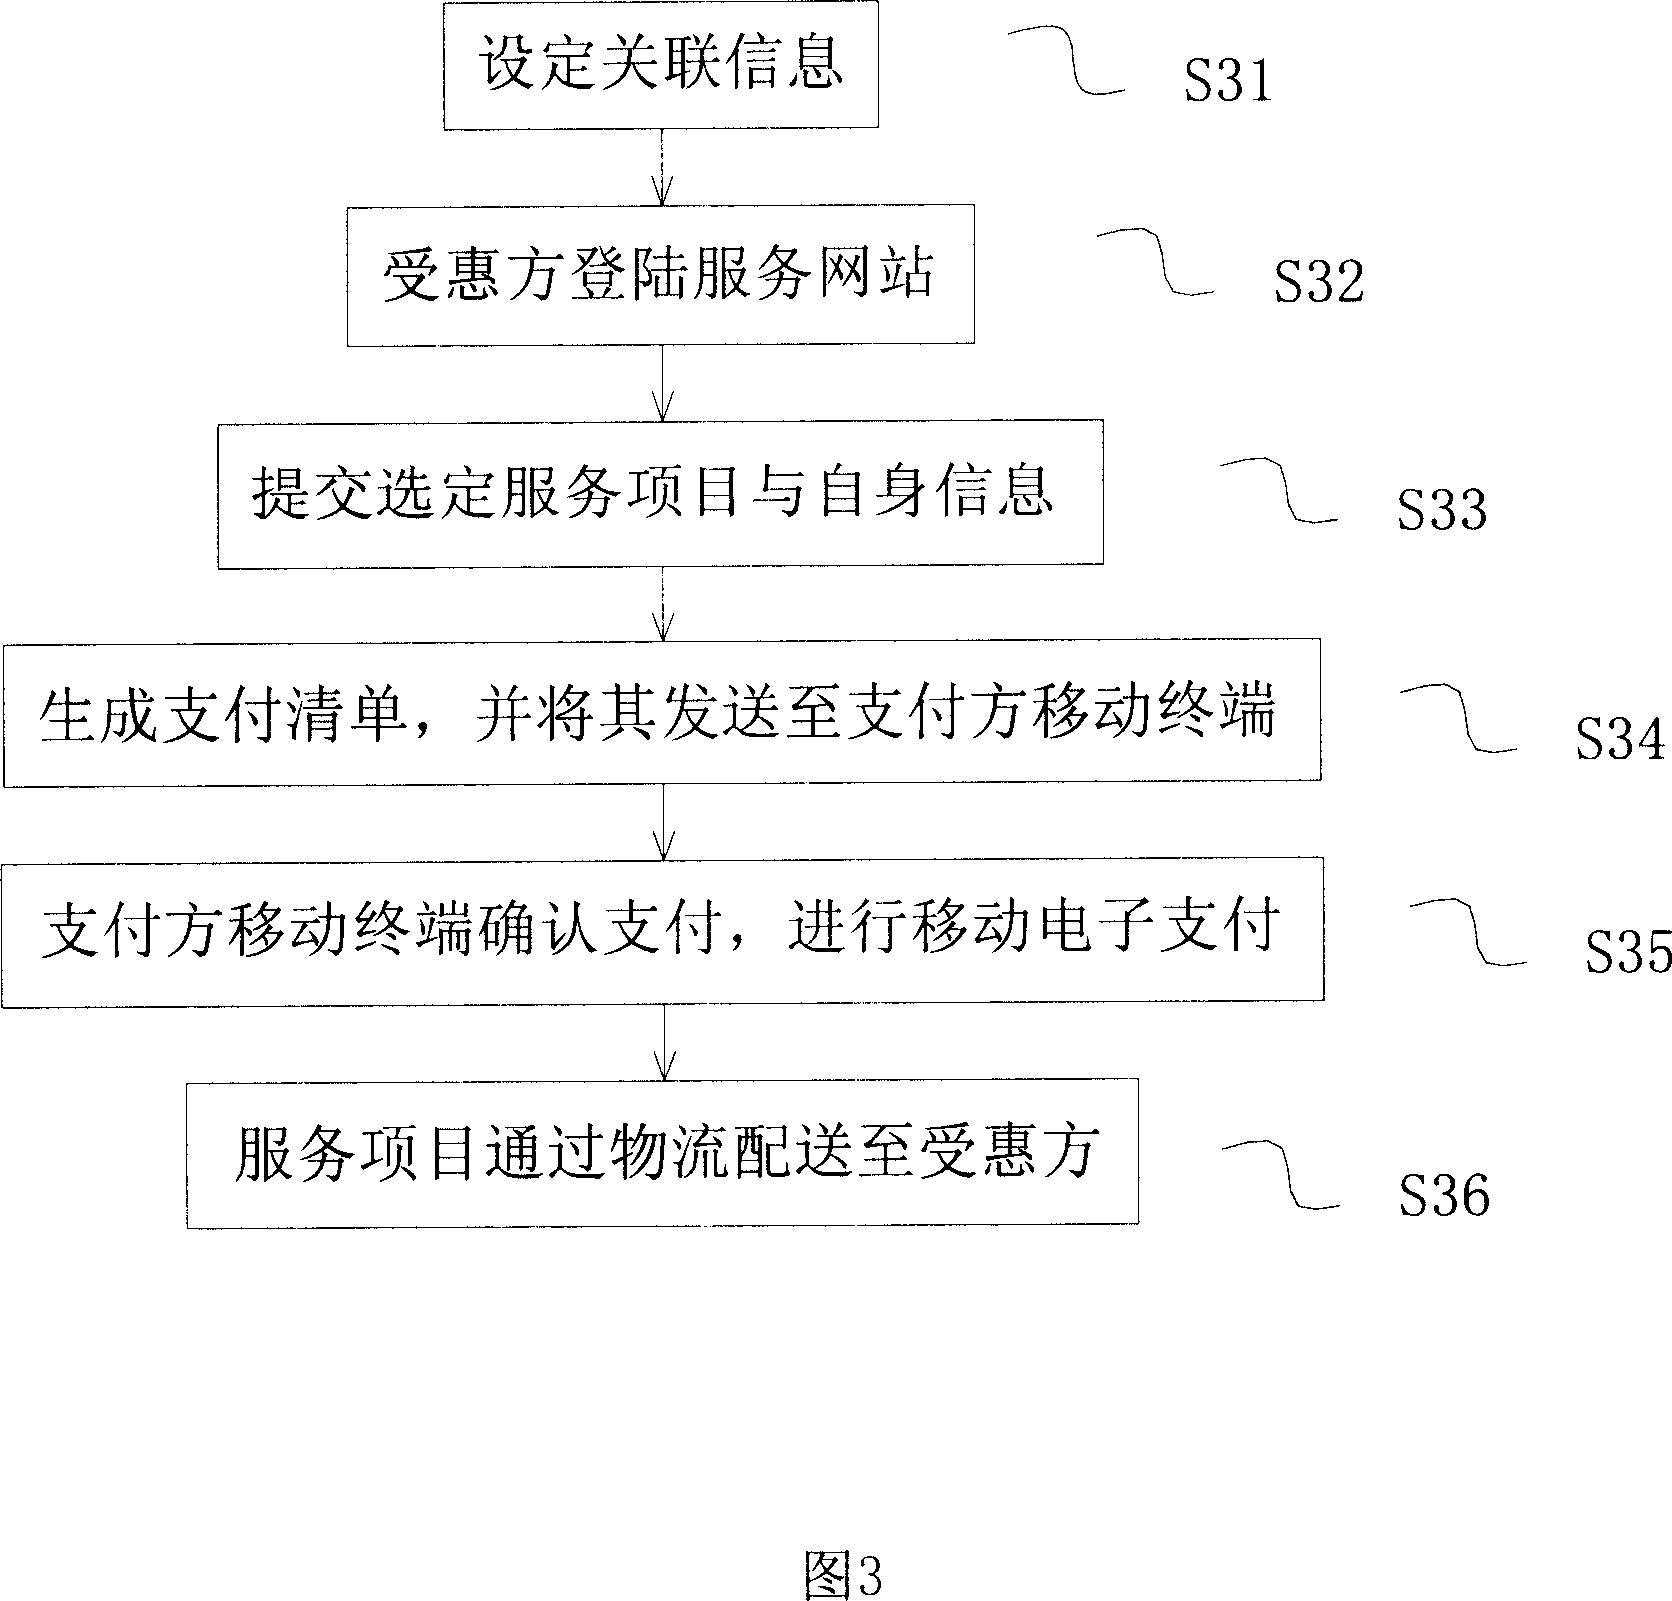 Method and system for paying consumption by mobile system